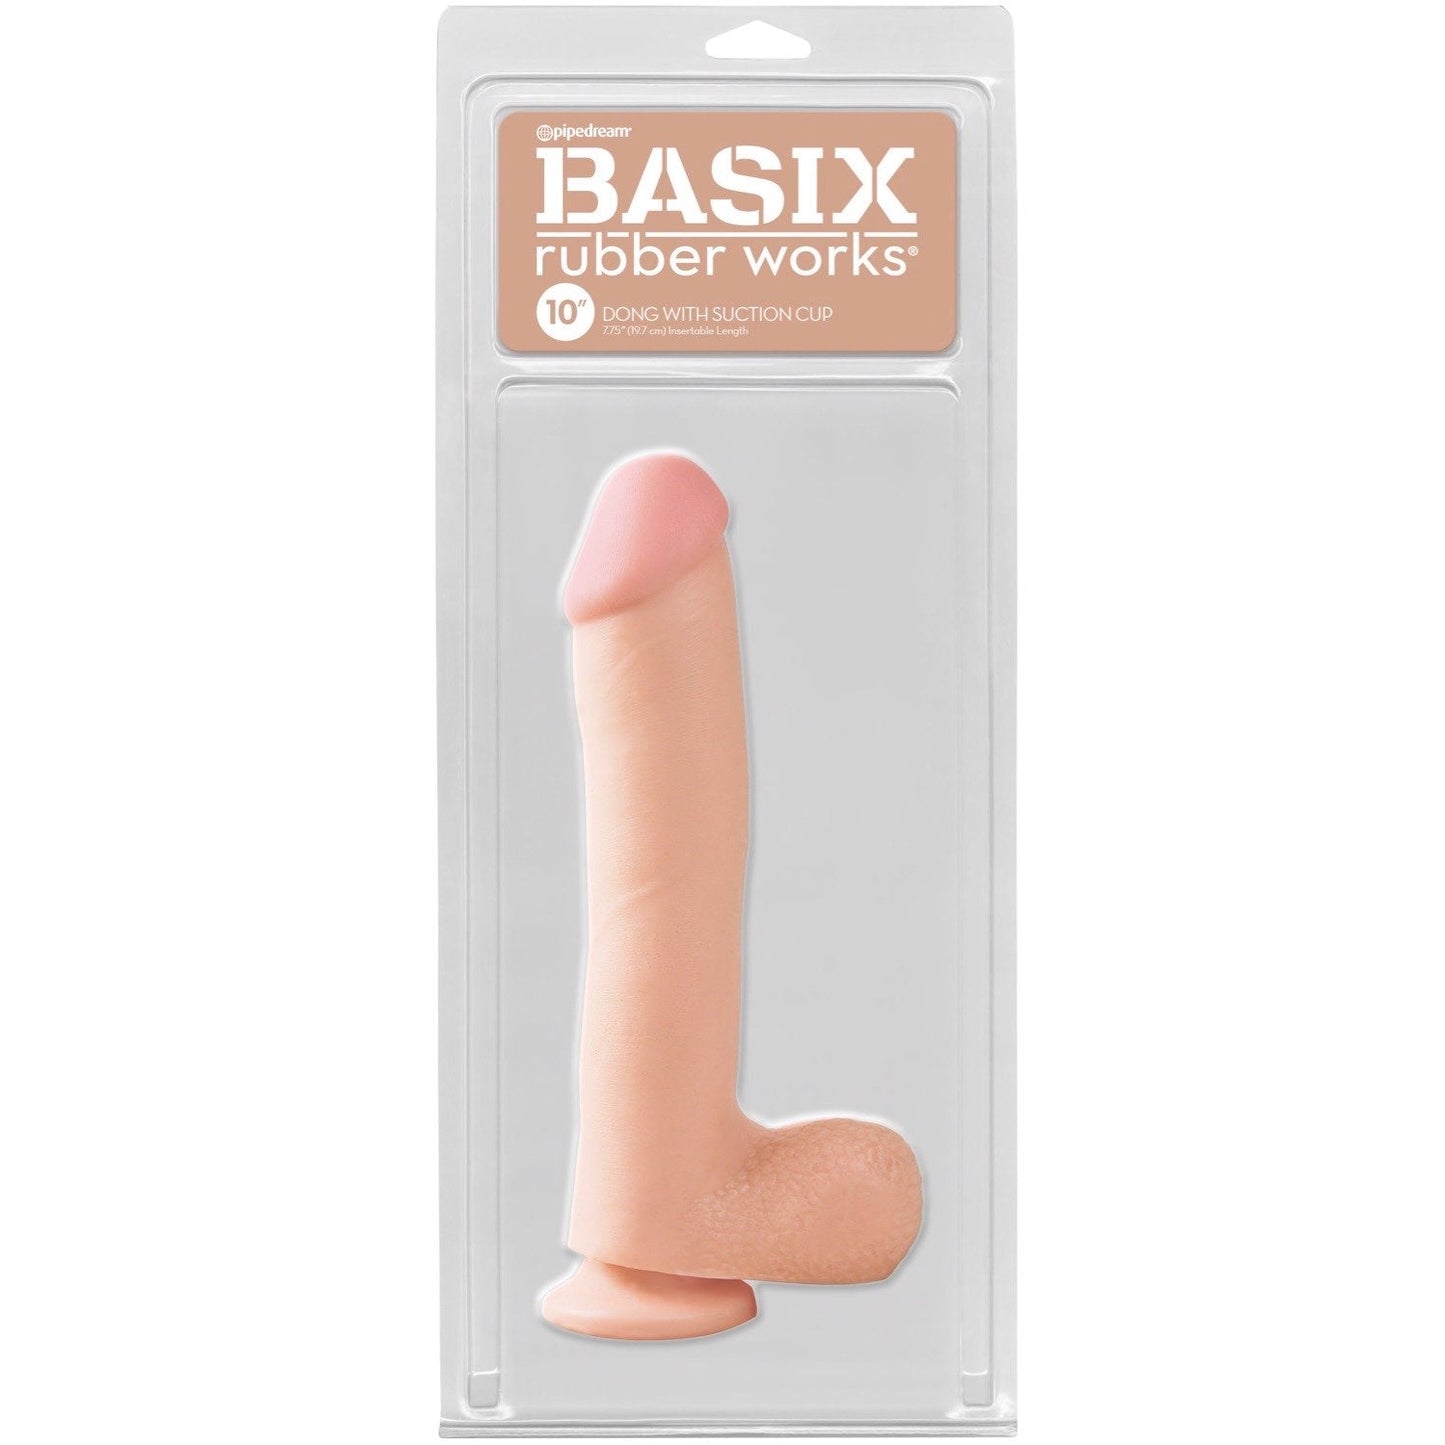 Rubber Works 10" Dong with Suction Cup - Flesh 25.4 cm (10") Dong